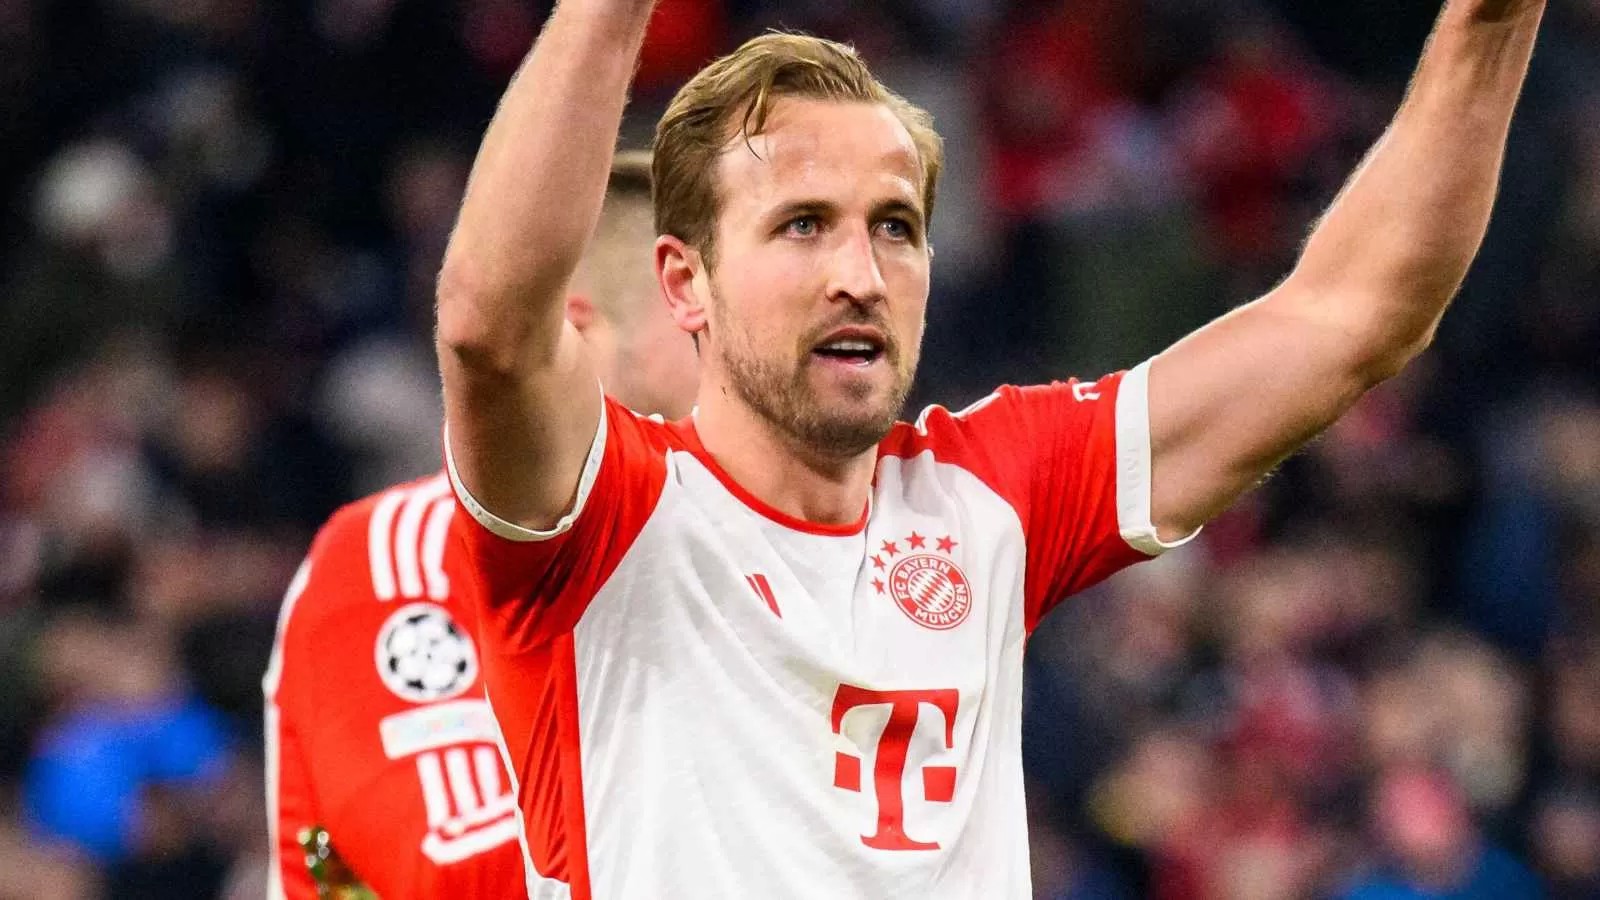 Man Utd, Chelsea mentioned as potential destinations for Kane as Bayern ‘might’ accept Â£120m